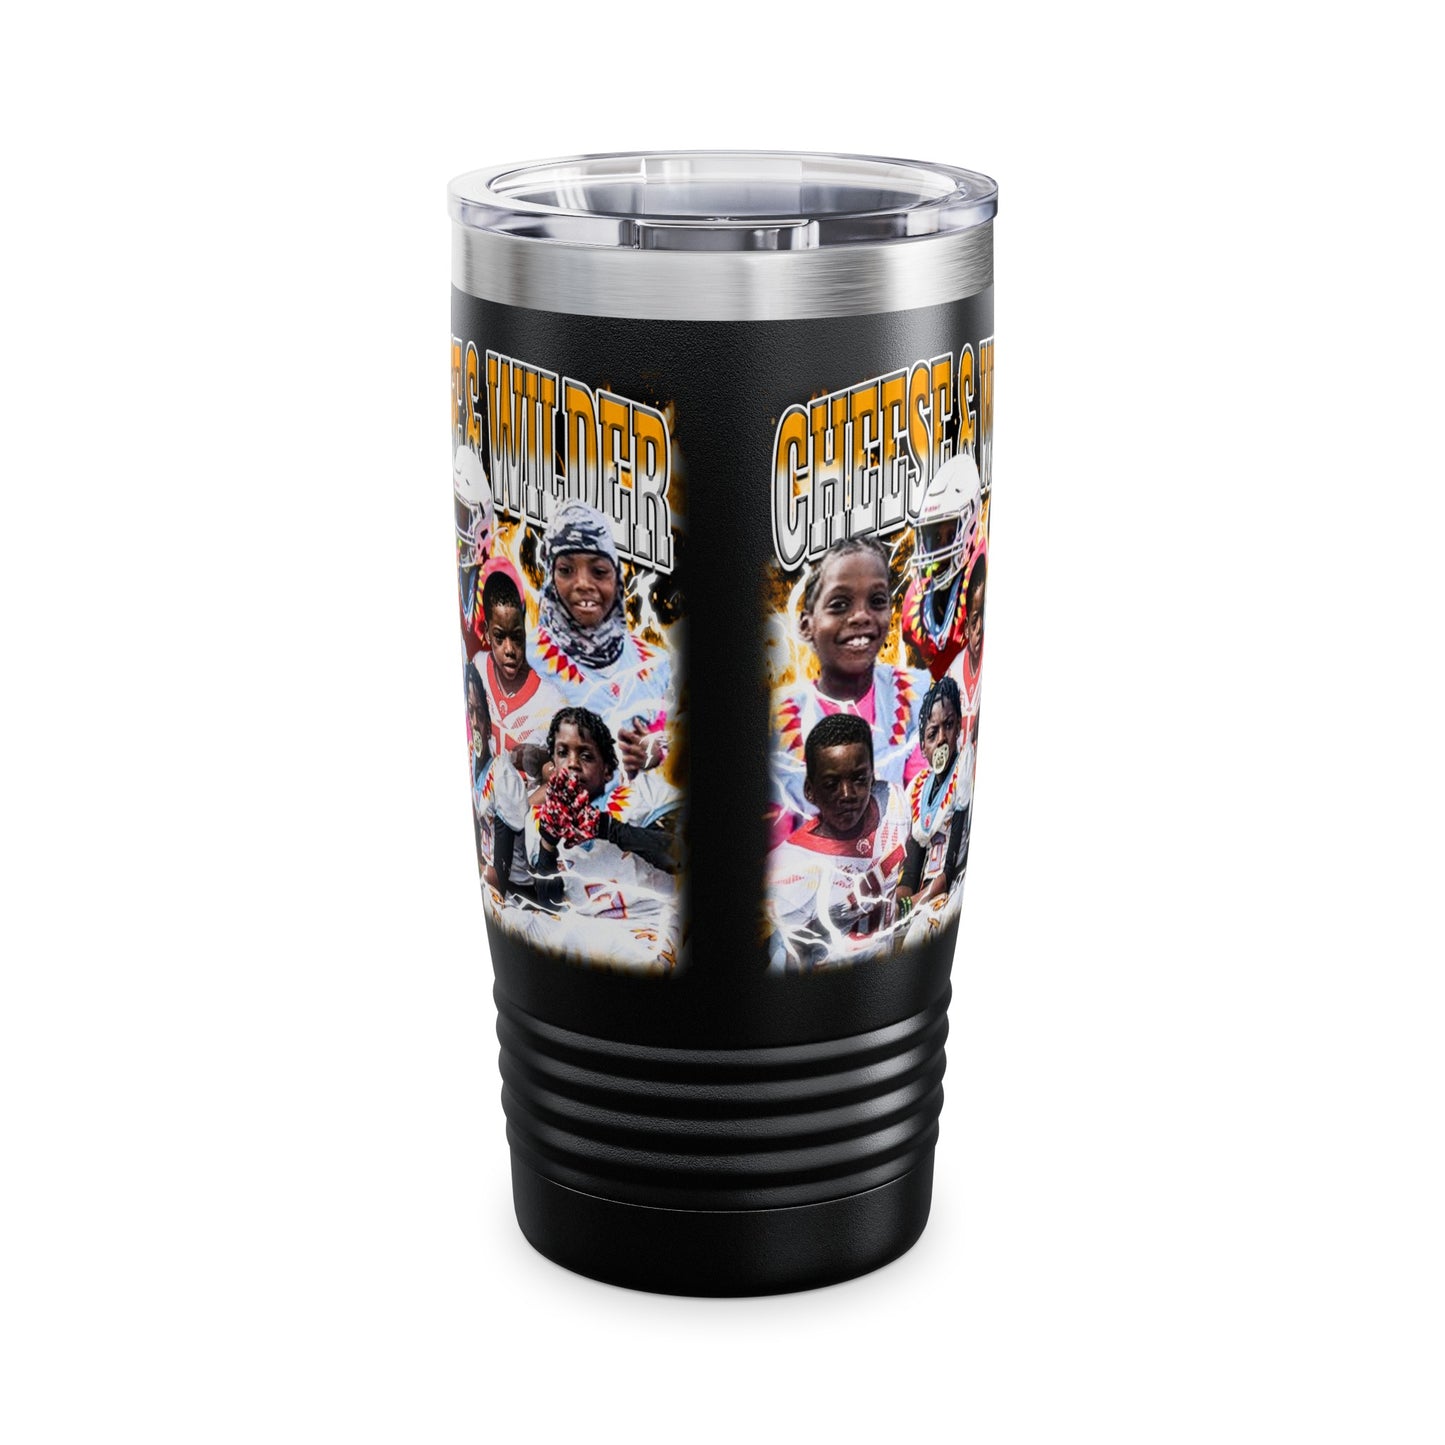 Cheese & Wilder Stainless Steal Tumbler